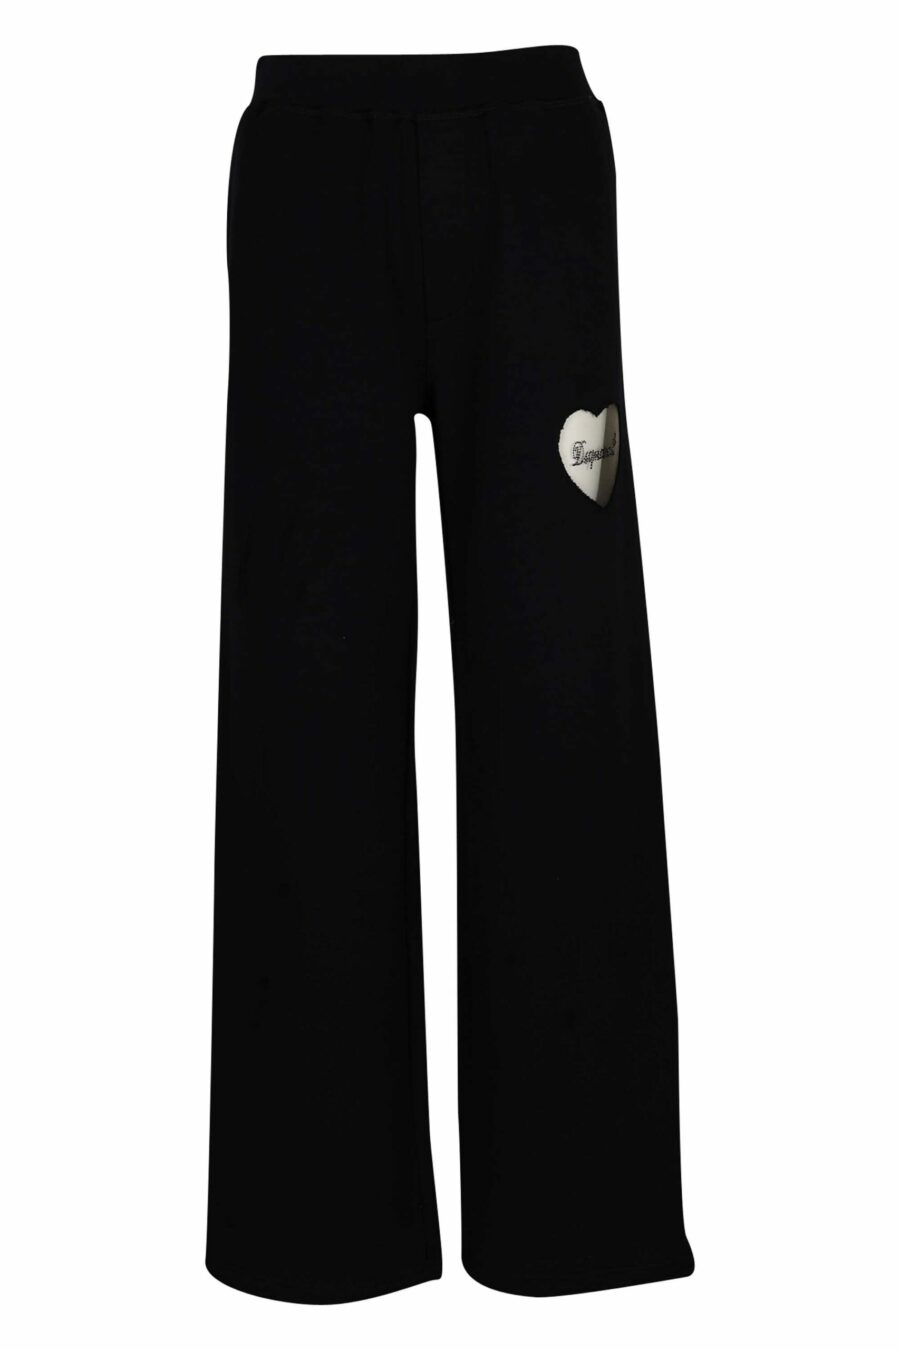 Black trousers with transparent heart logo - 8054148304249 scaled